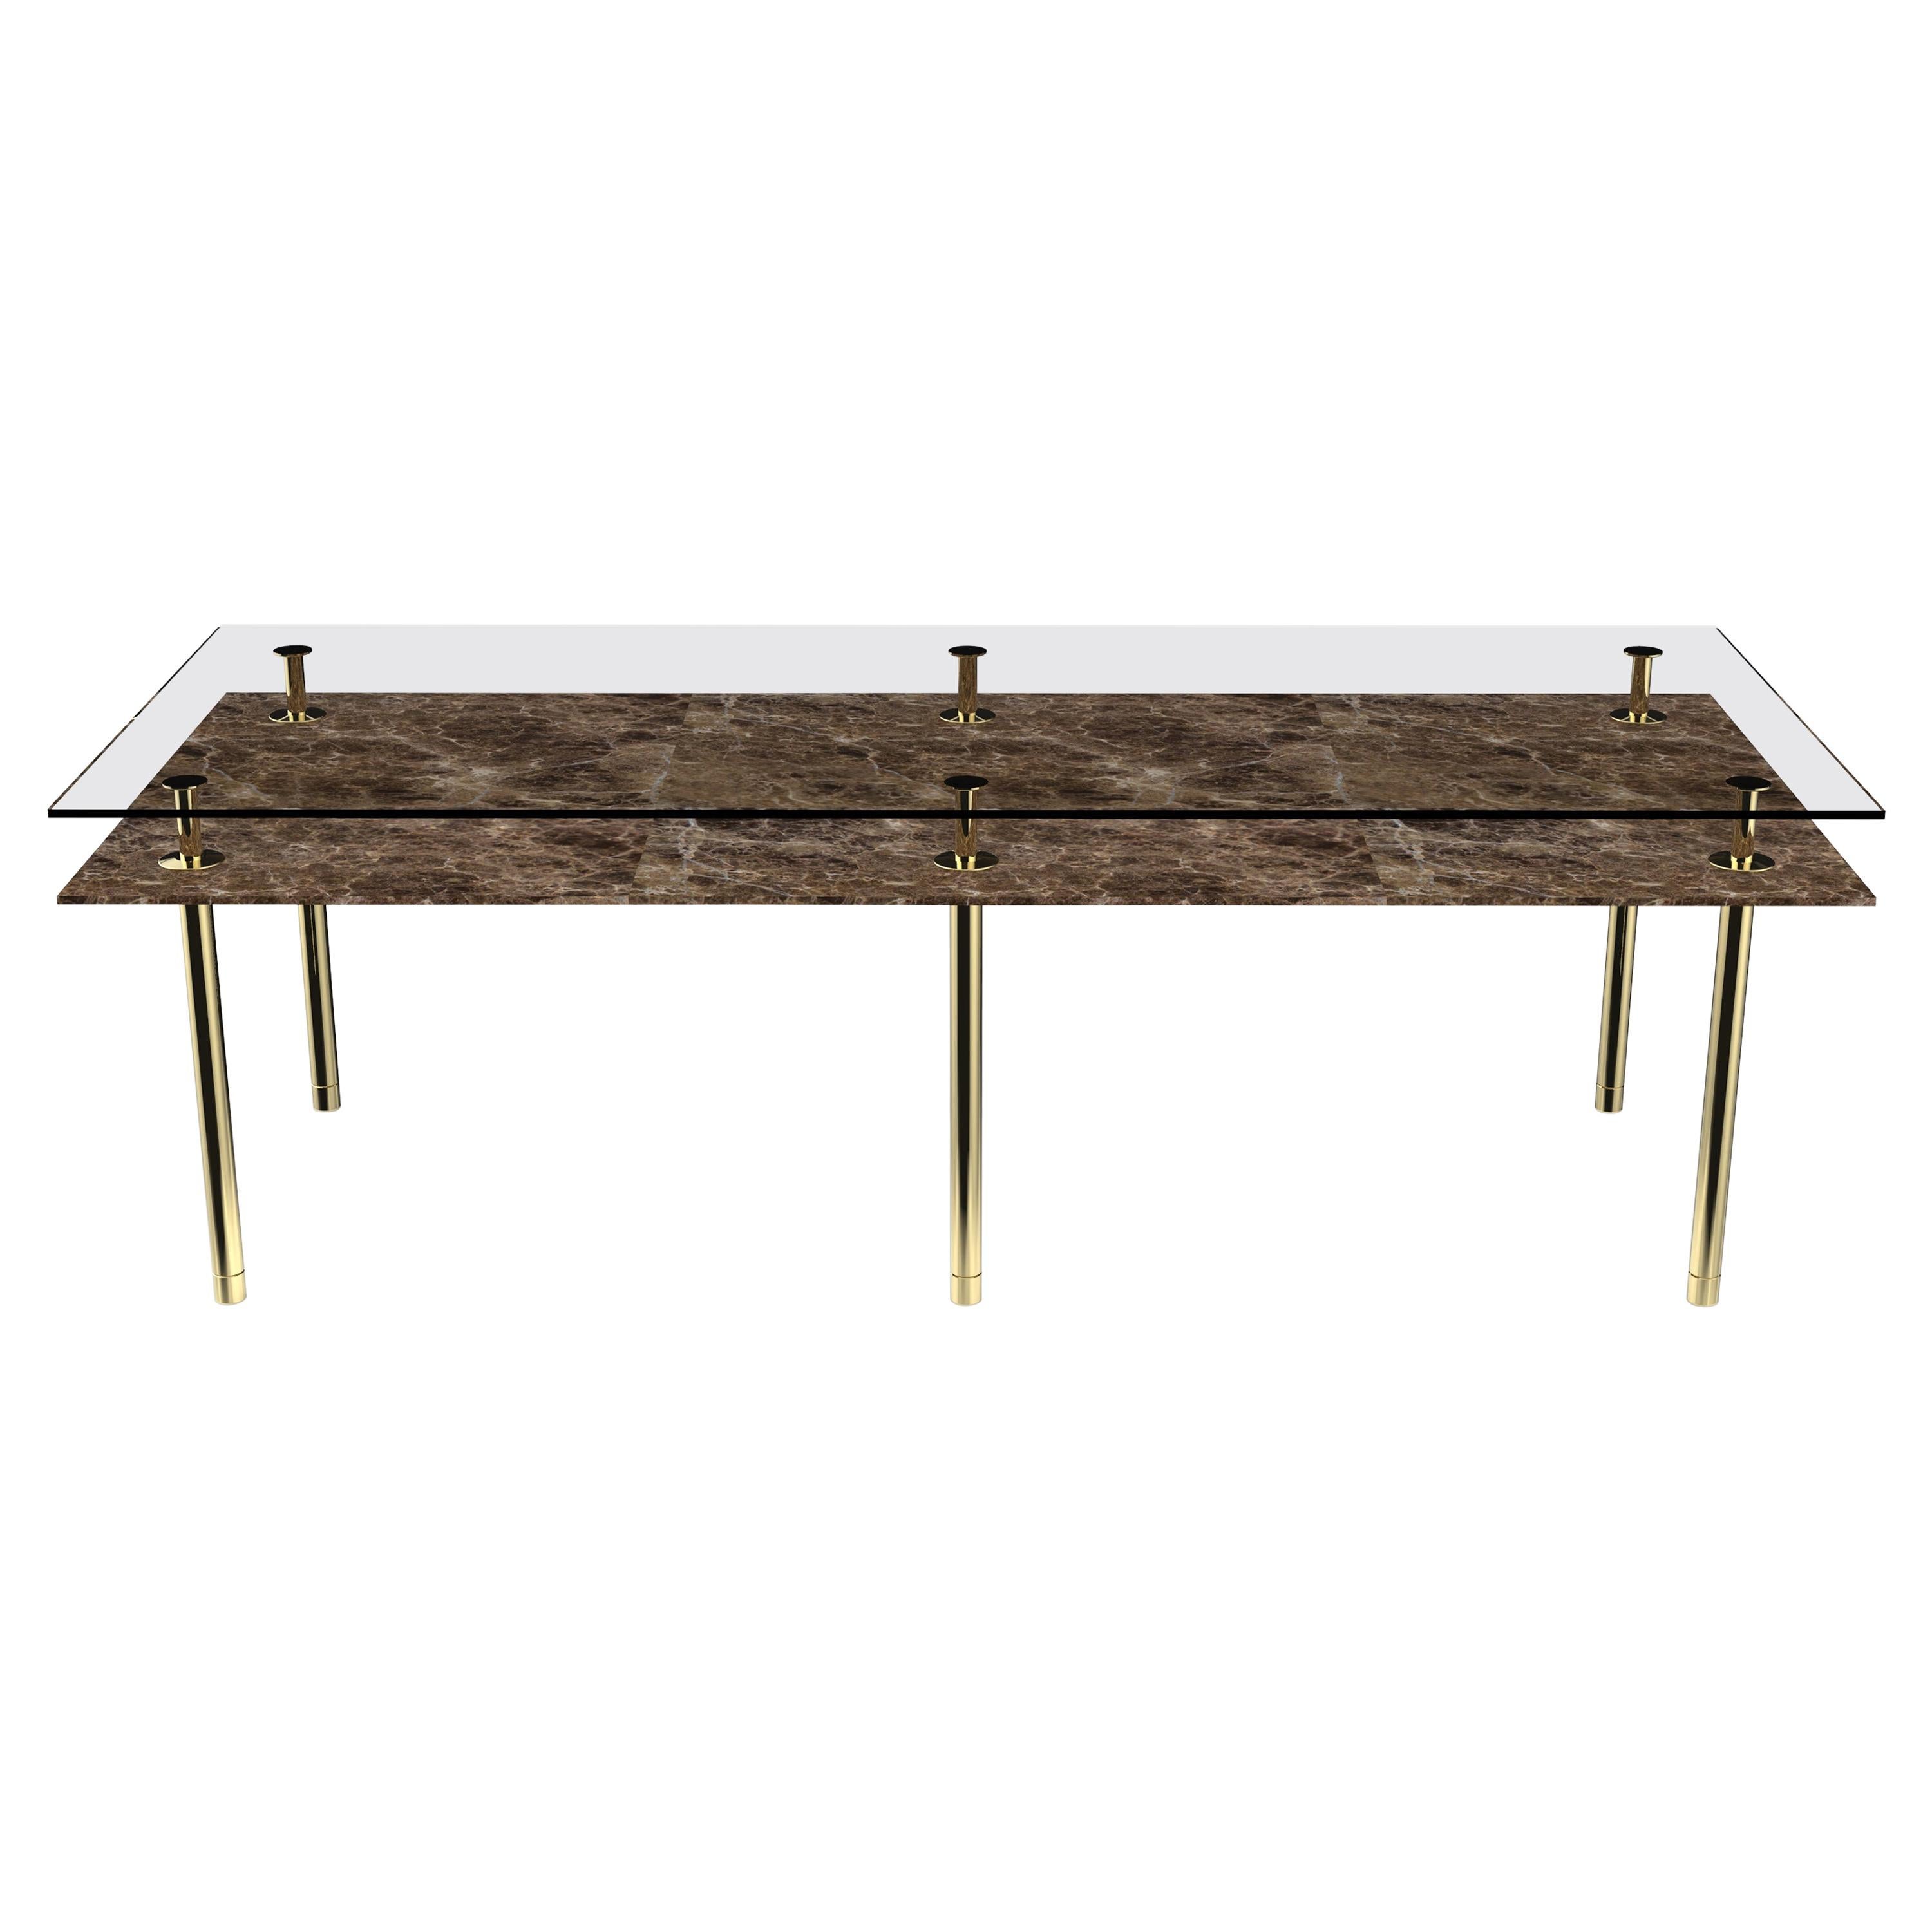 Legs Medium Dining Table with Emperador Dark Marble Top and Polished Brass